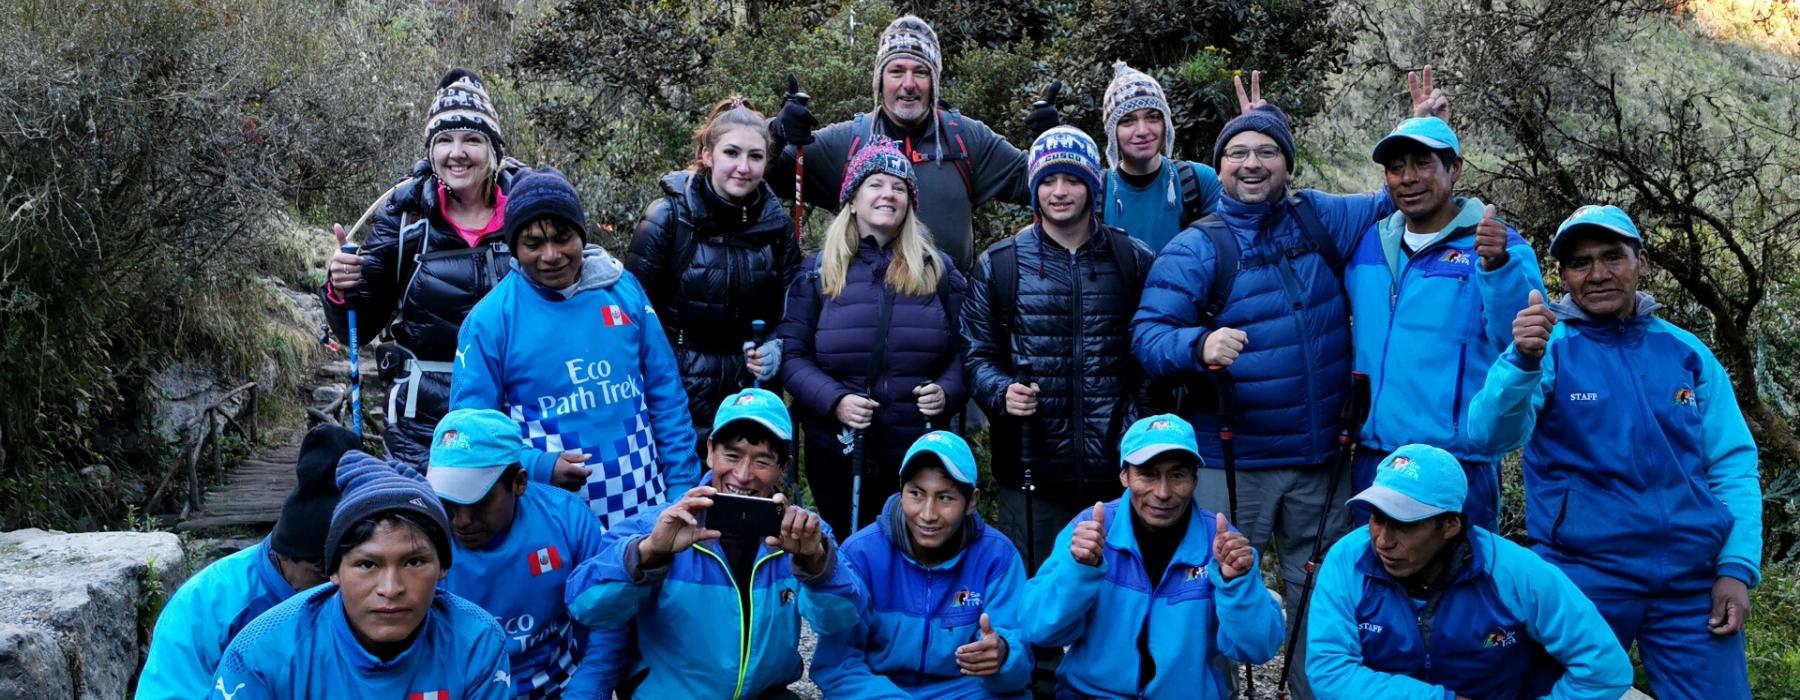 inca trail expeditions staff